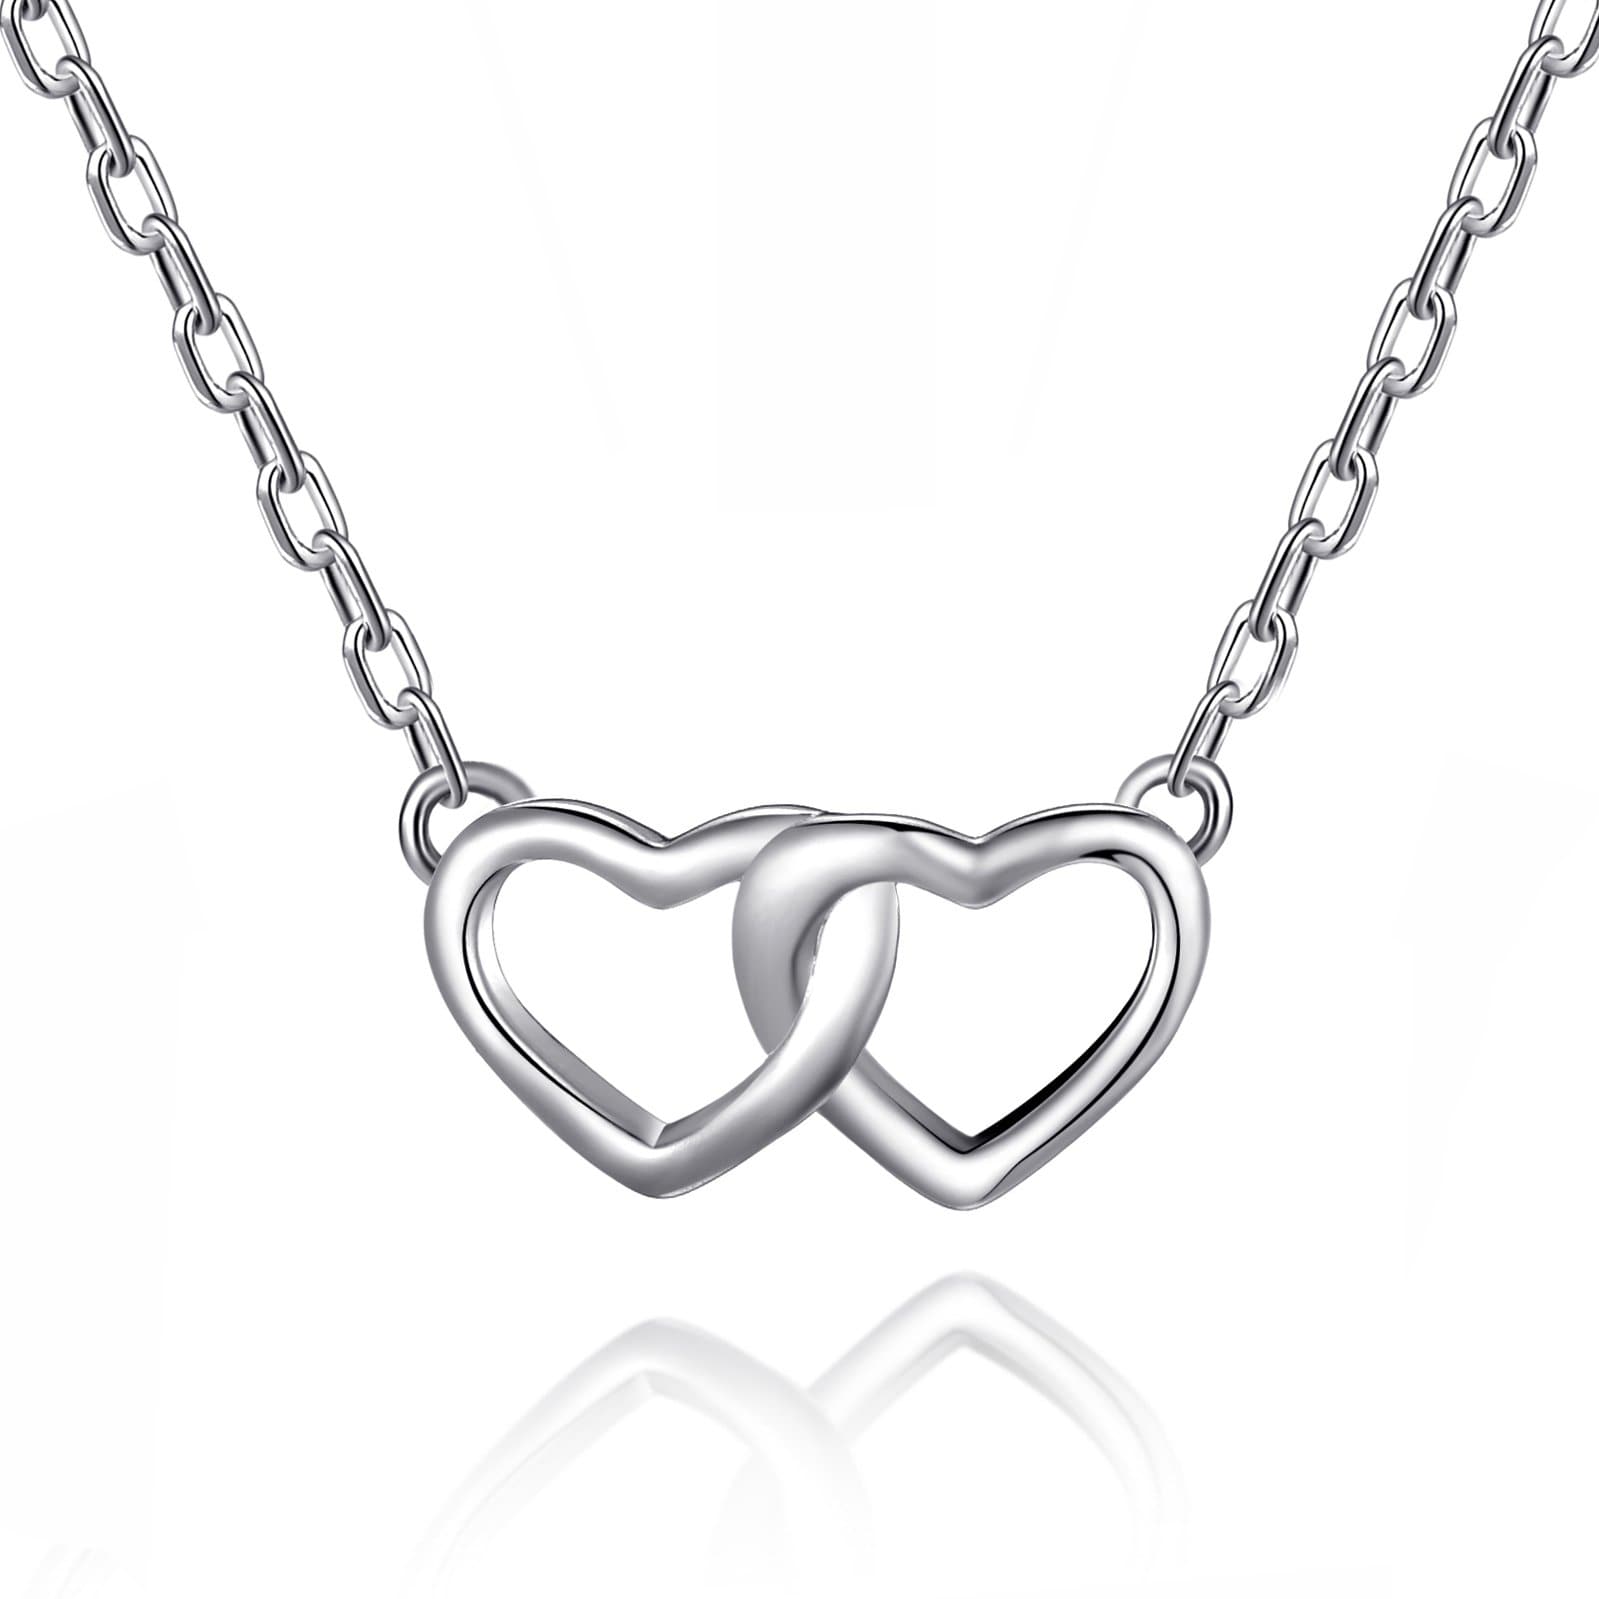 Sterling Silver Mother and Daughter Quote Heart Link Necklace